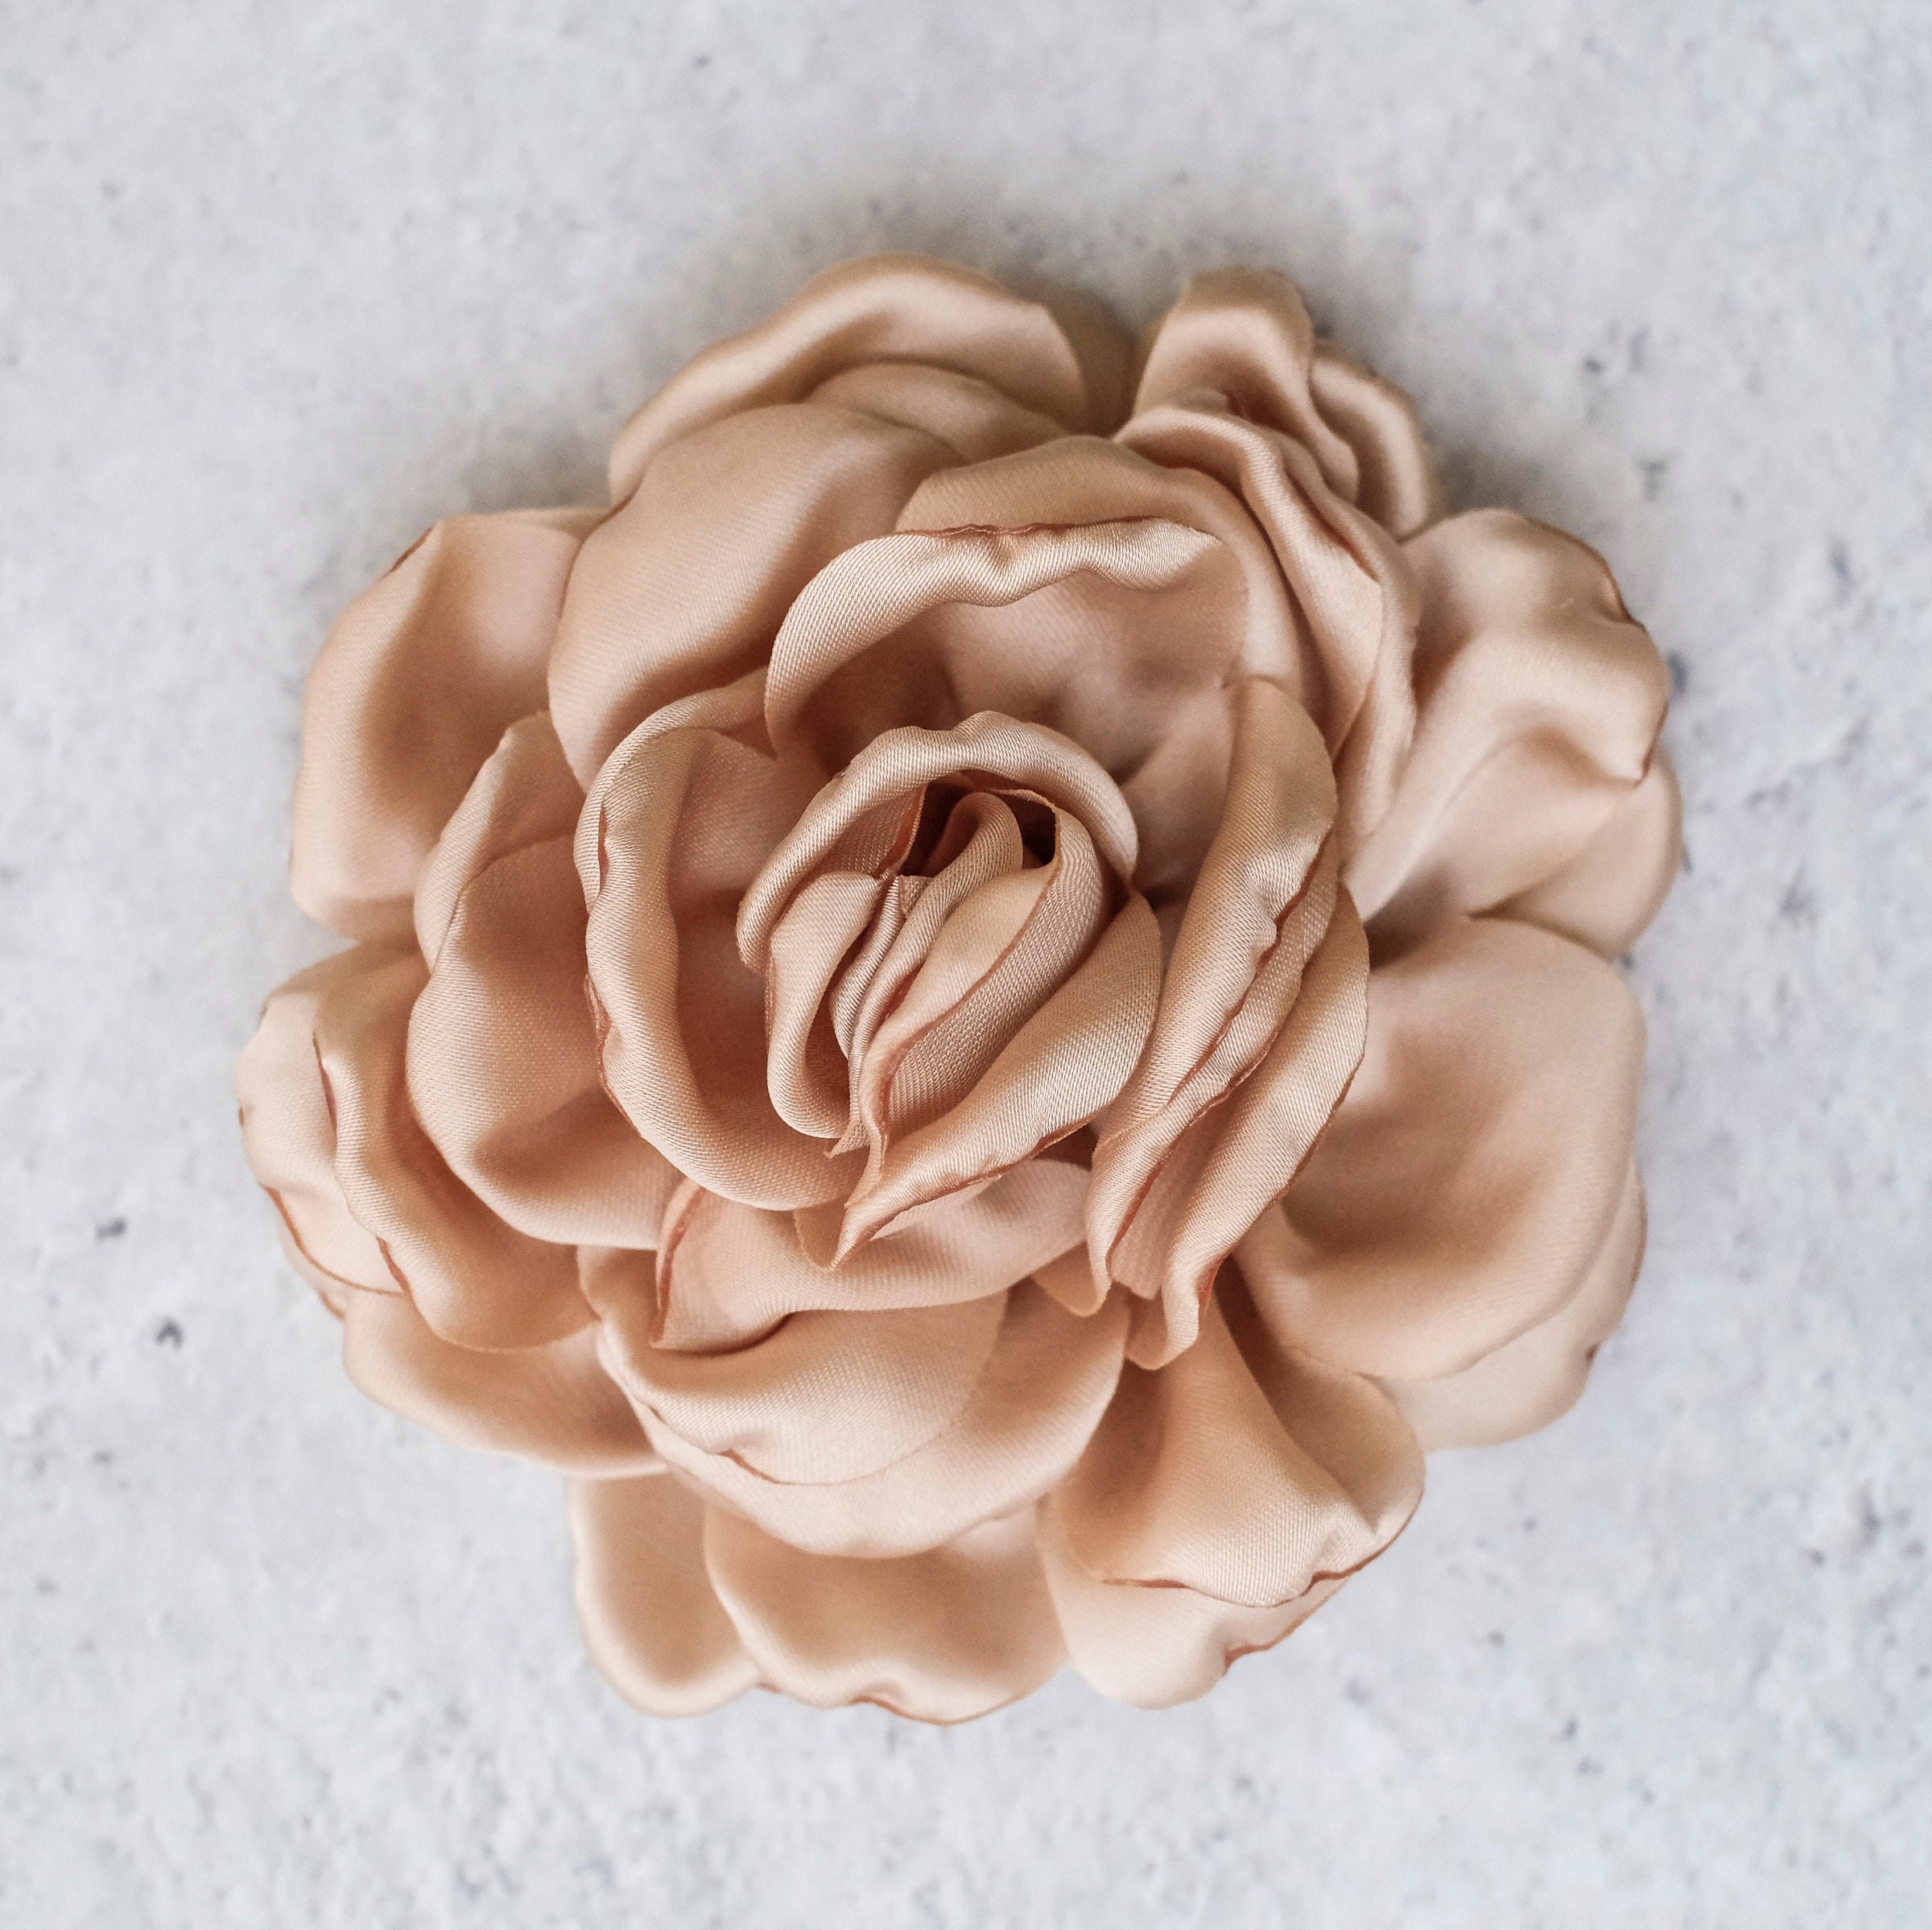 Fabric Flower Artificial Satin Cabbage Rose Satin Rose Tropical Coral Pink Millinery Flower Large Bright Coral Garden Rose